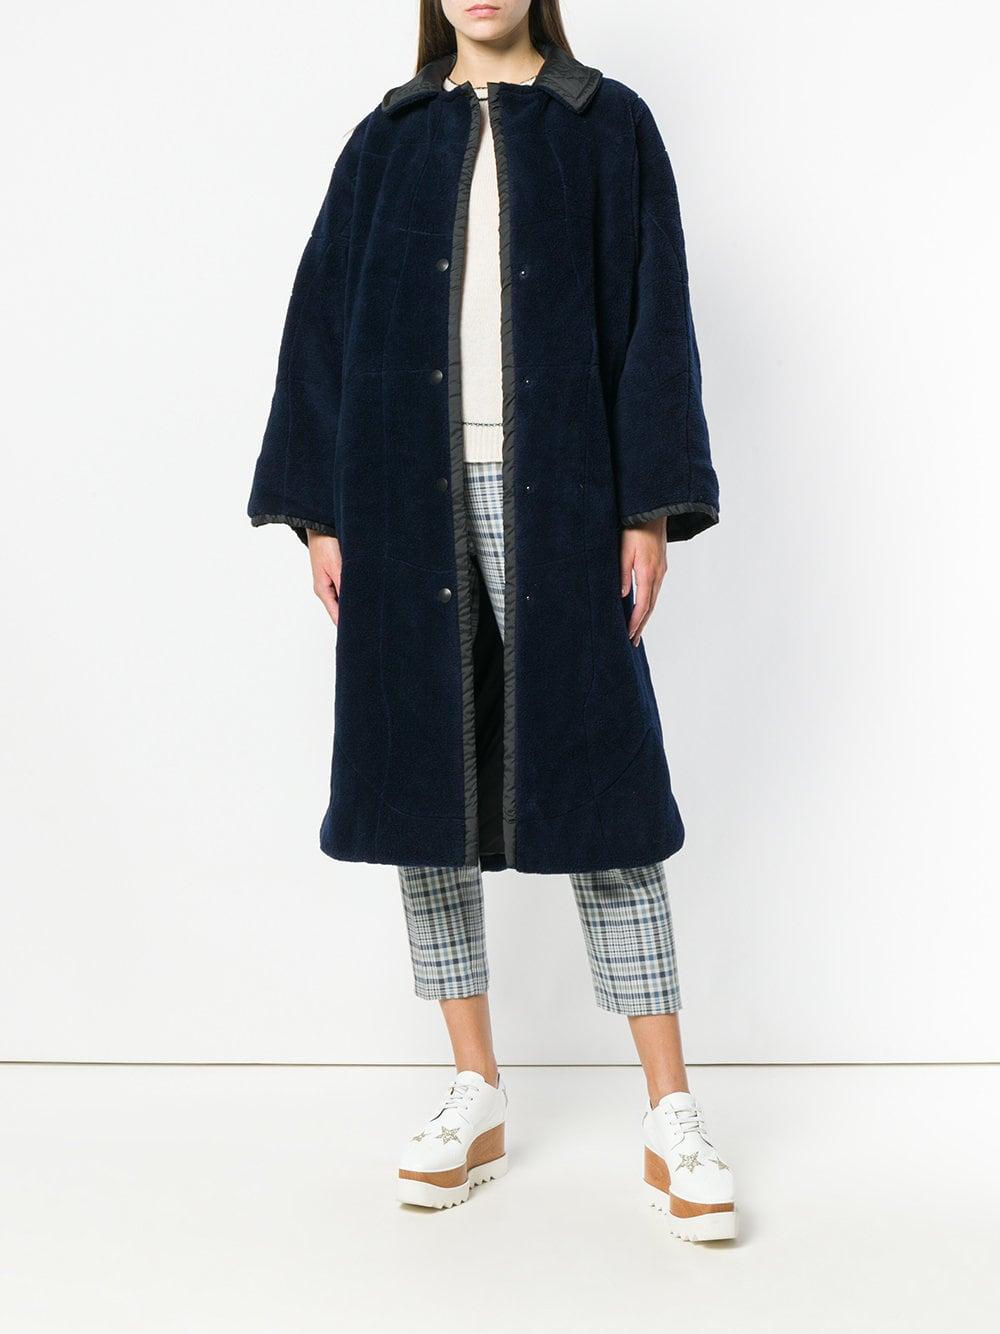 State of Claude Montana blue long oversize coat, blue synthetic outer fabric, edges and lining by black fabric, row front press studs closure, two pockets, two inner cuff-bands.
Years: 90s

Made in Italy

Size: 40 FR

Height: 115 cm
Bust: 68